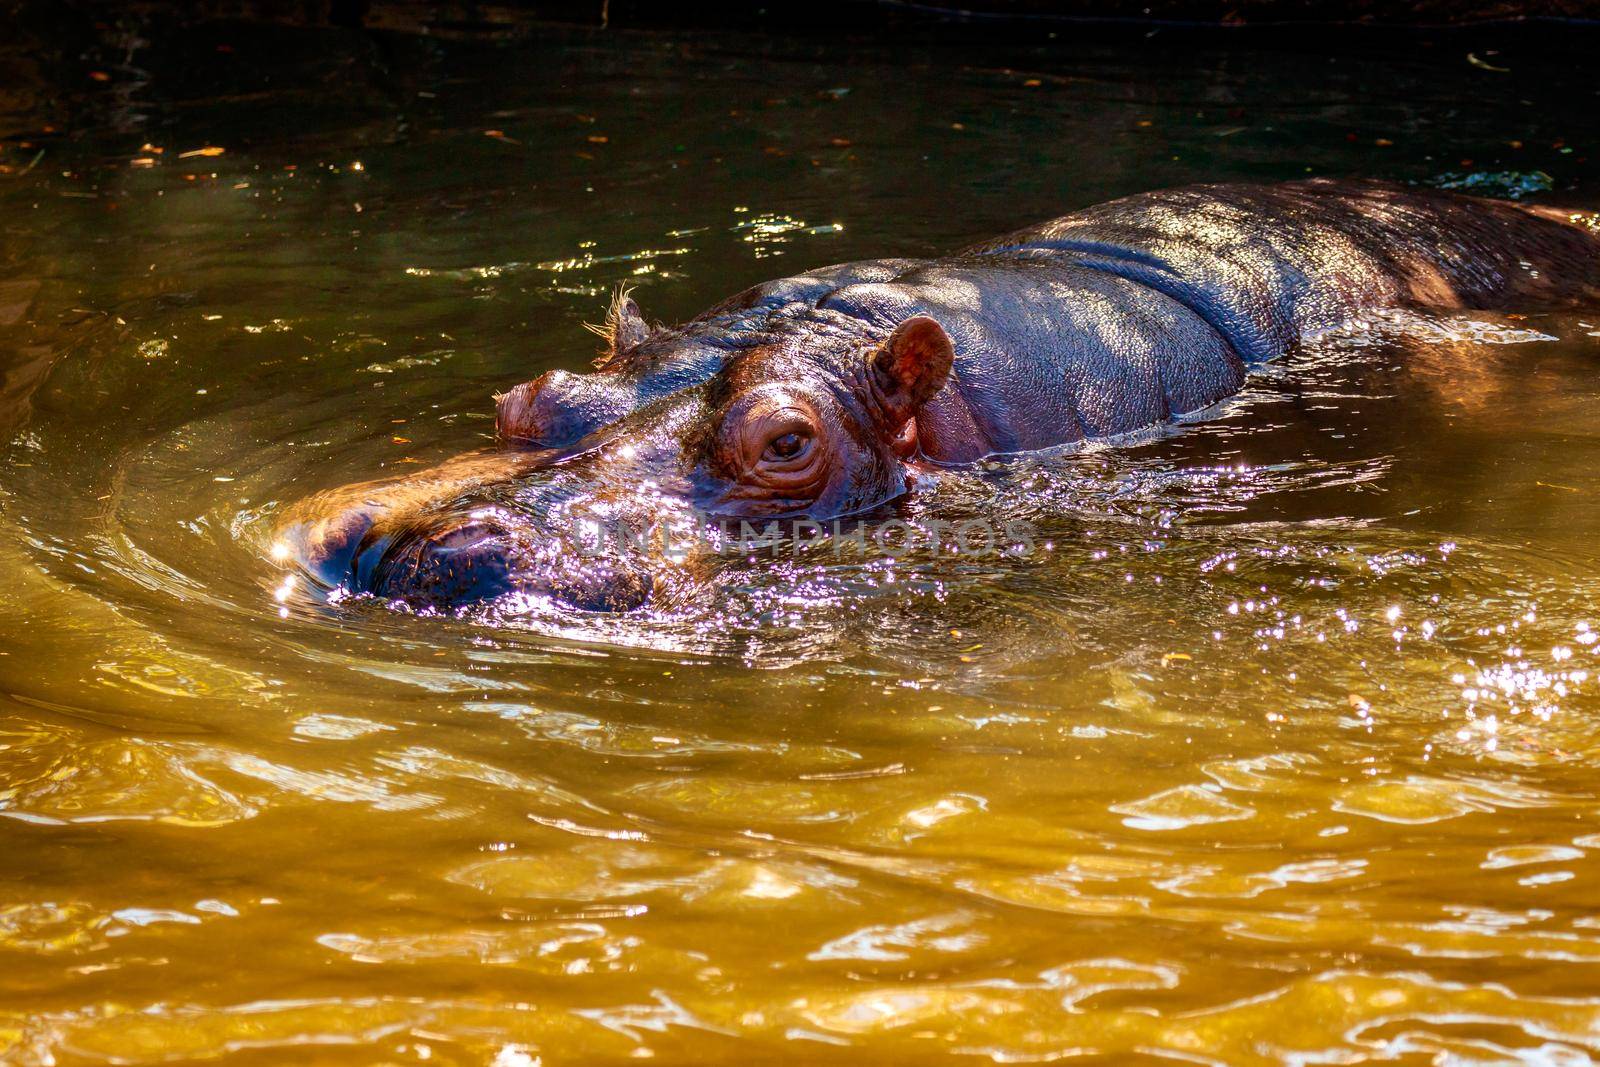 Hippo in water by gepeng